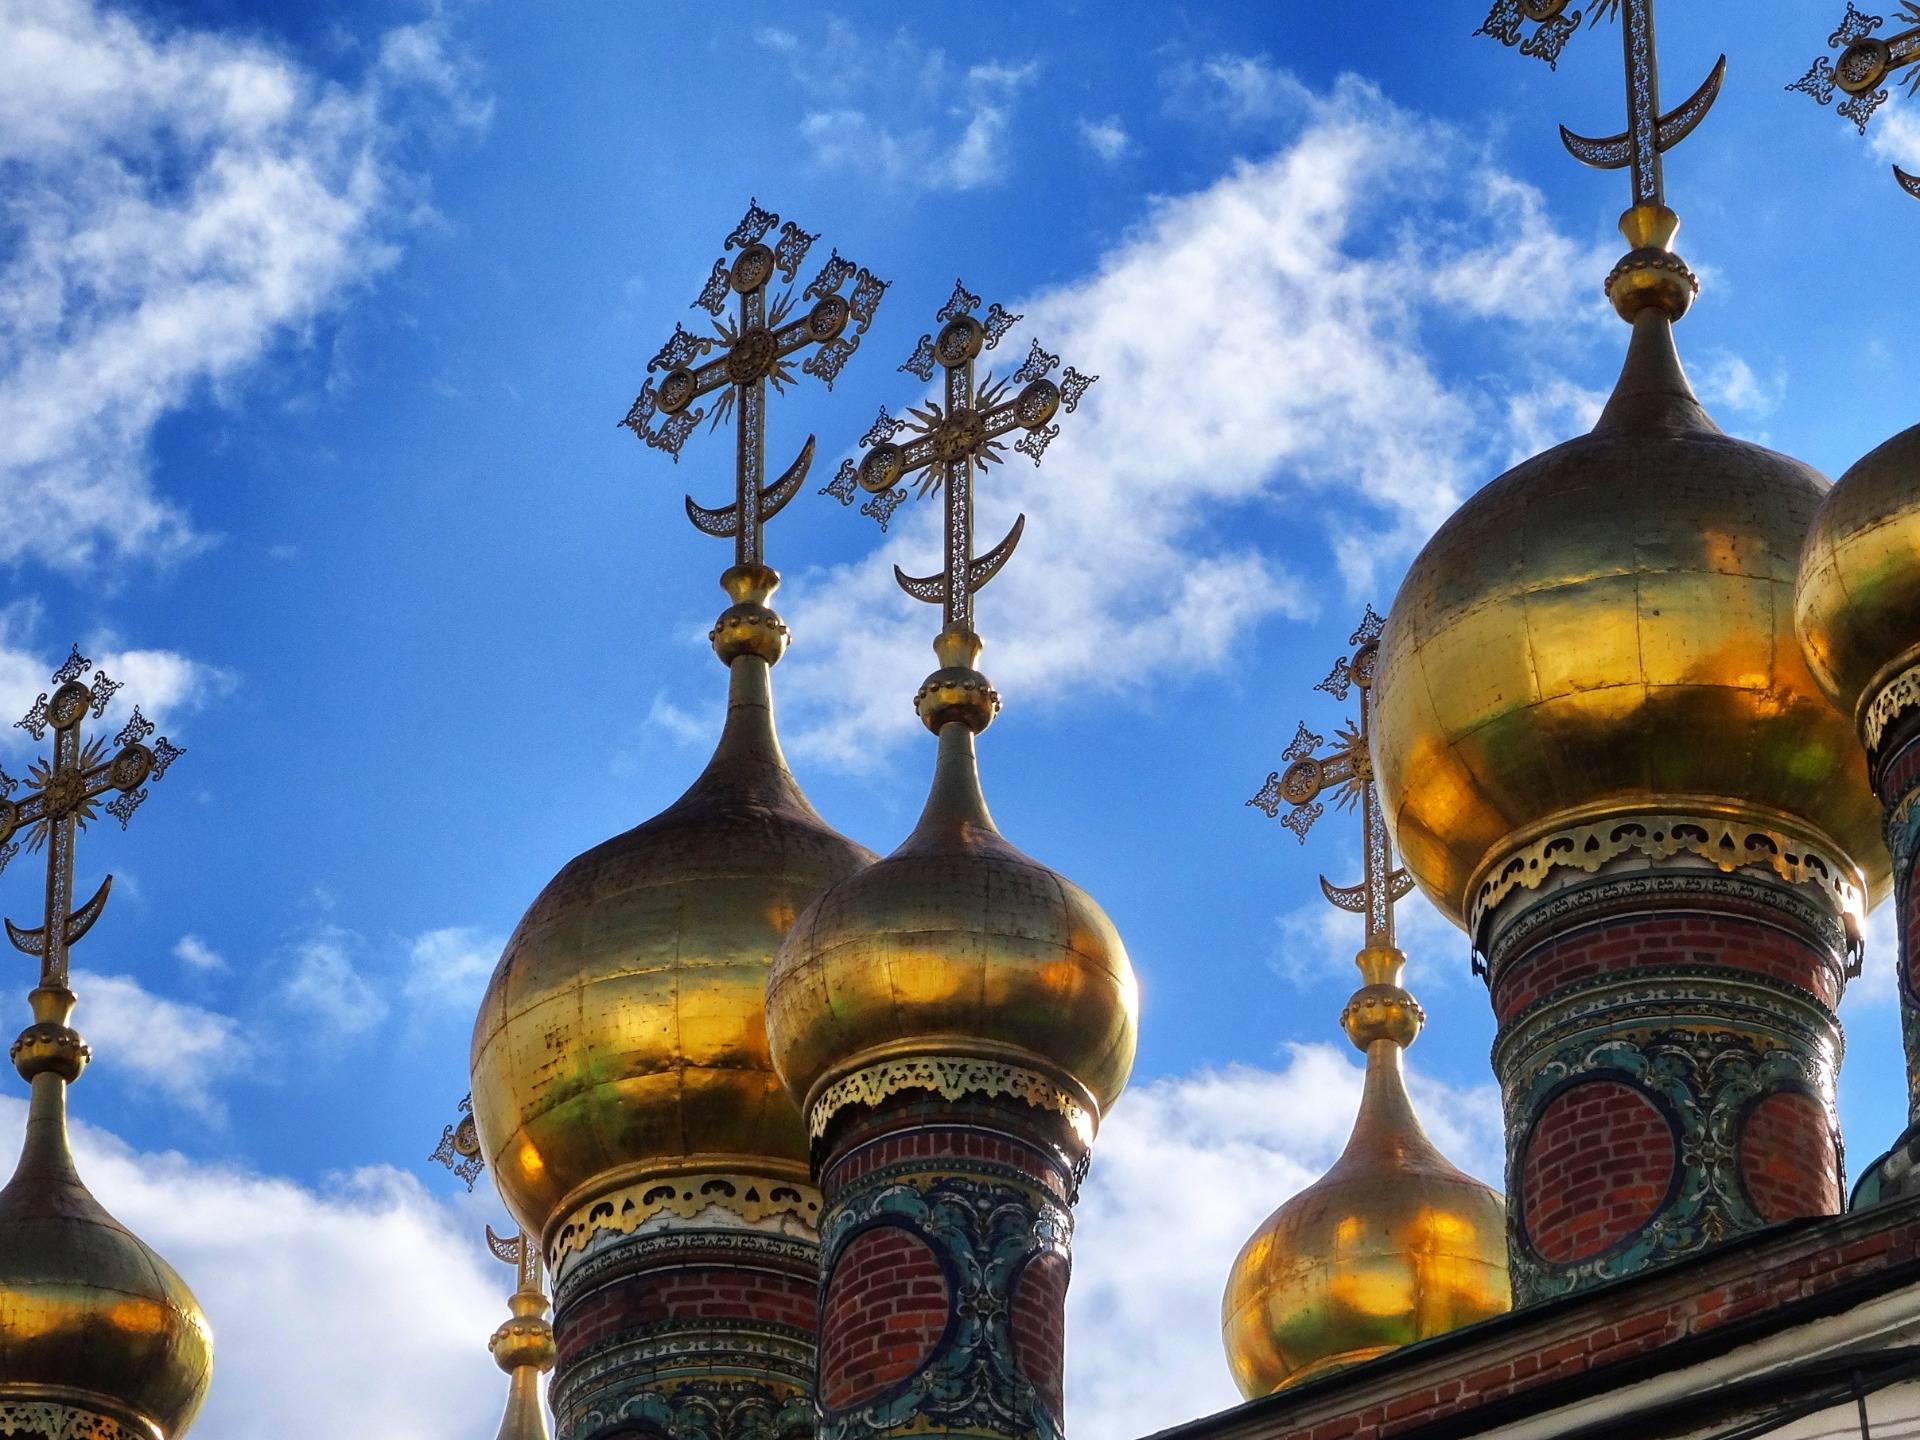 The golden roofs of the Cathedral of the Annunciation, built by architects from Pskov in 1484-1489